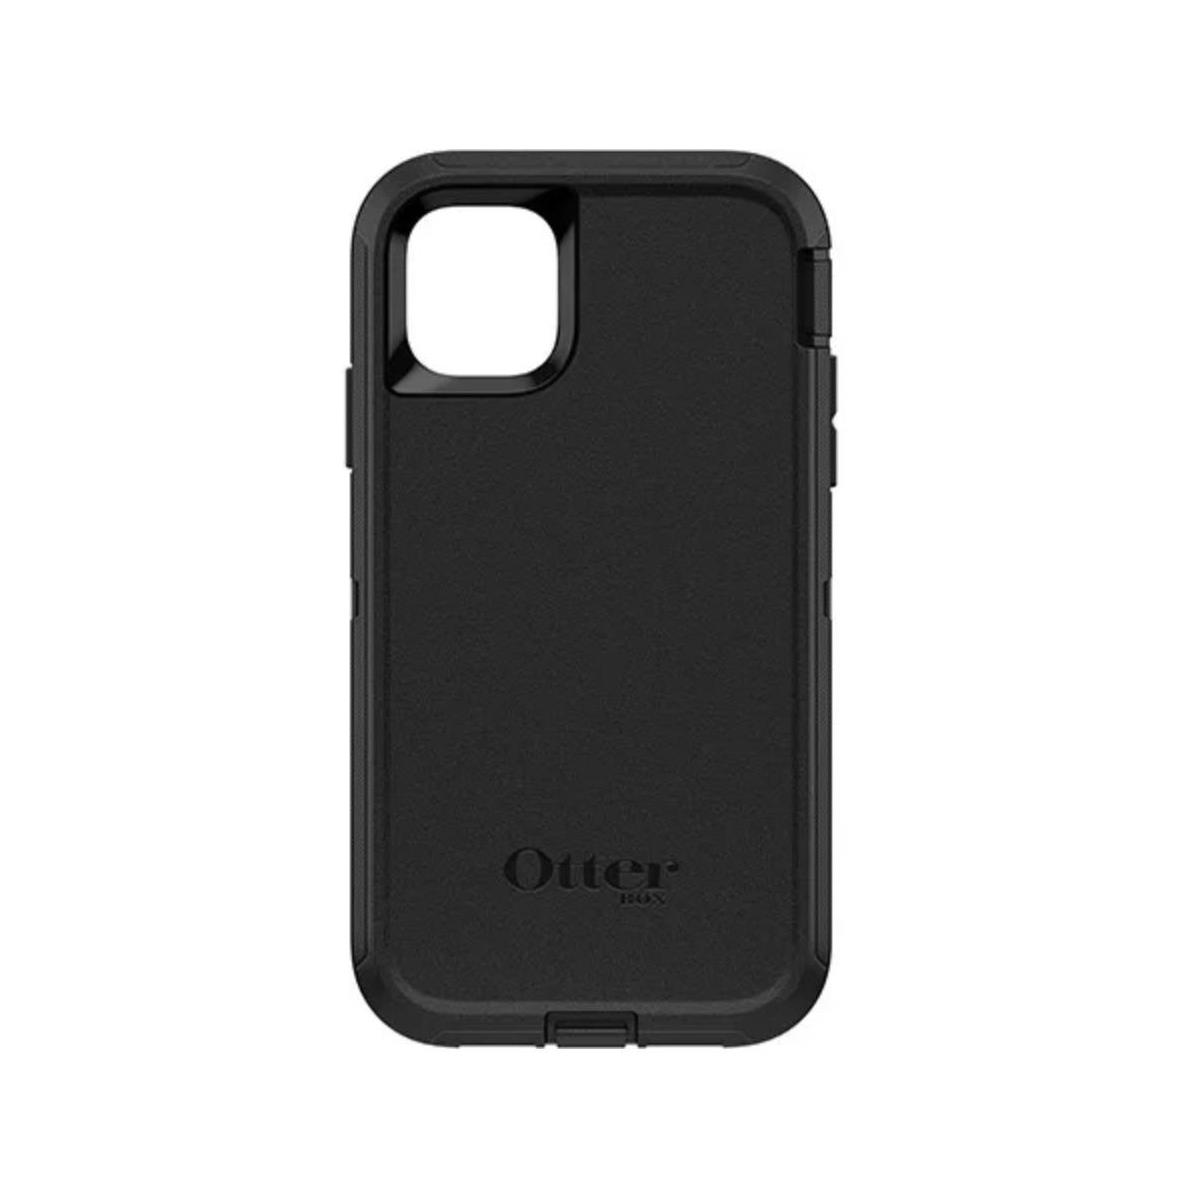 Image of OtterBox Defender Screenless Edition Case for iPhone 11